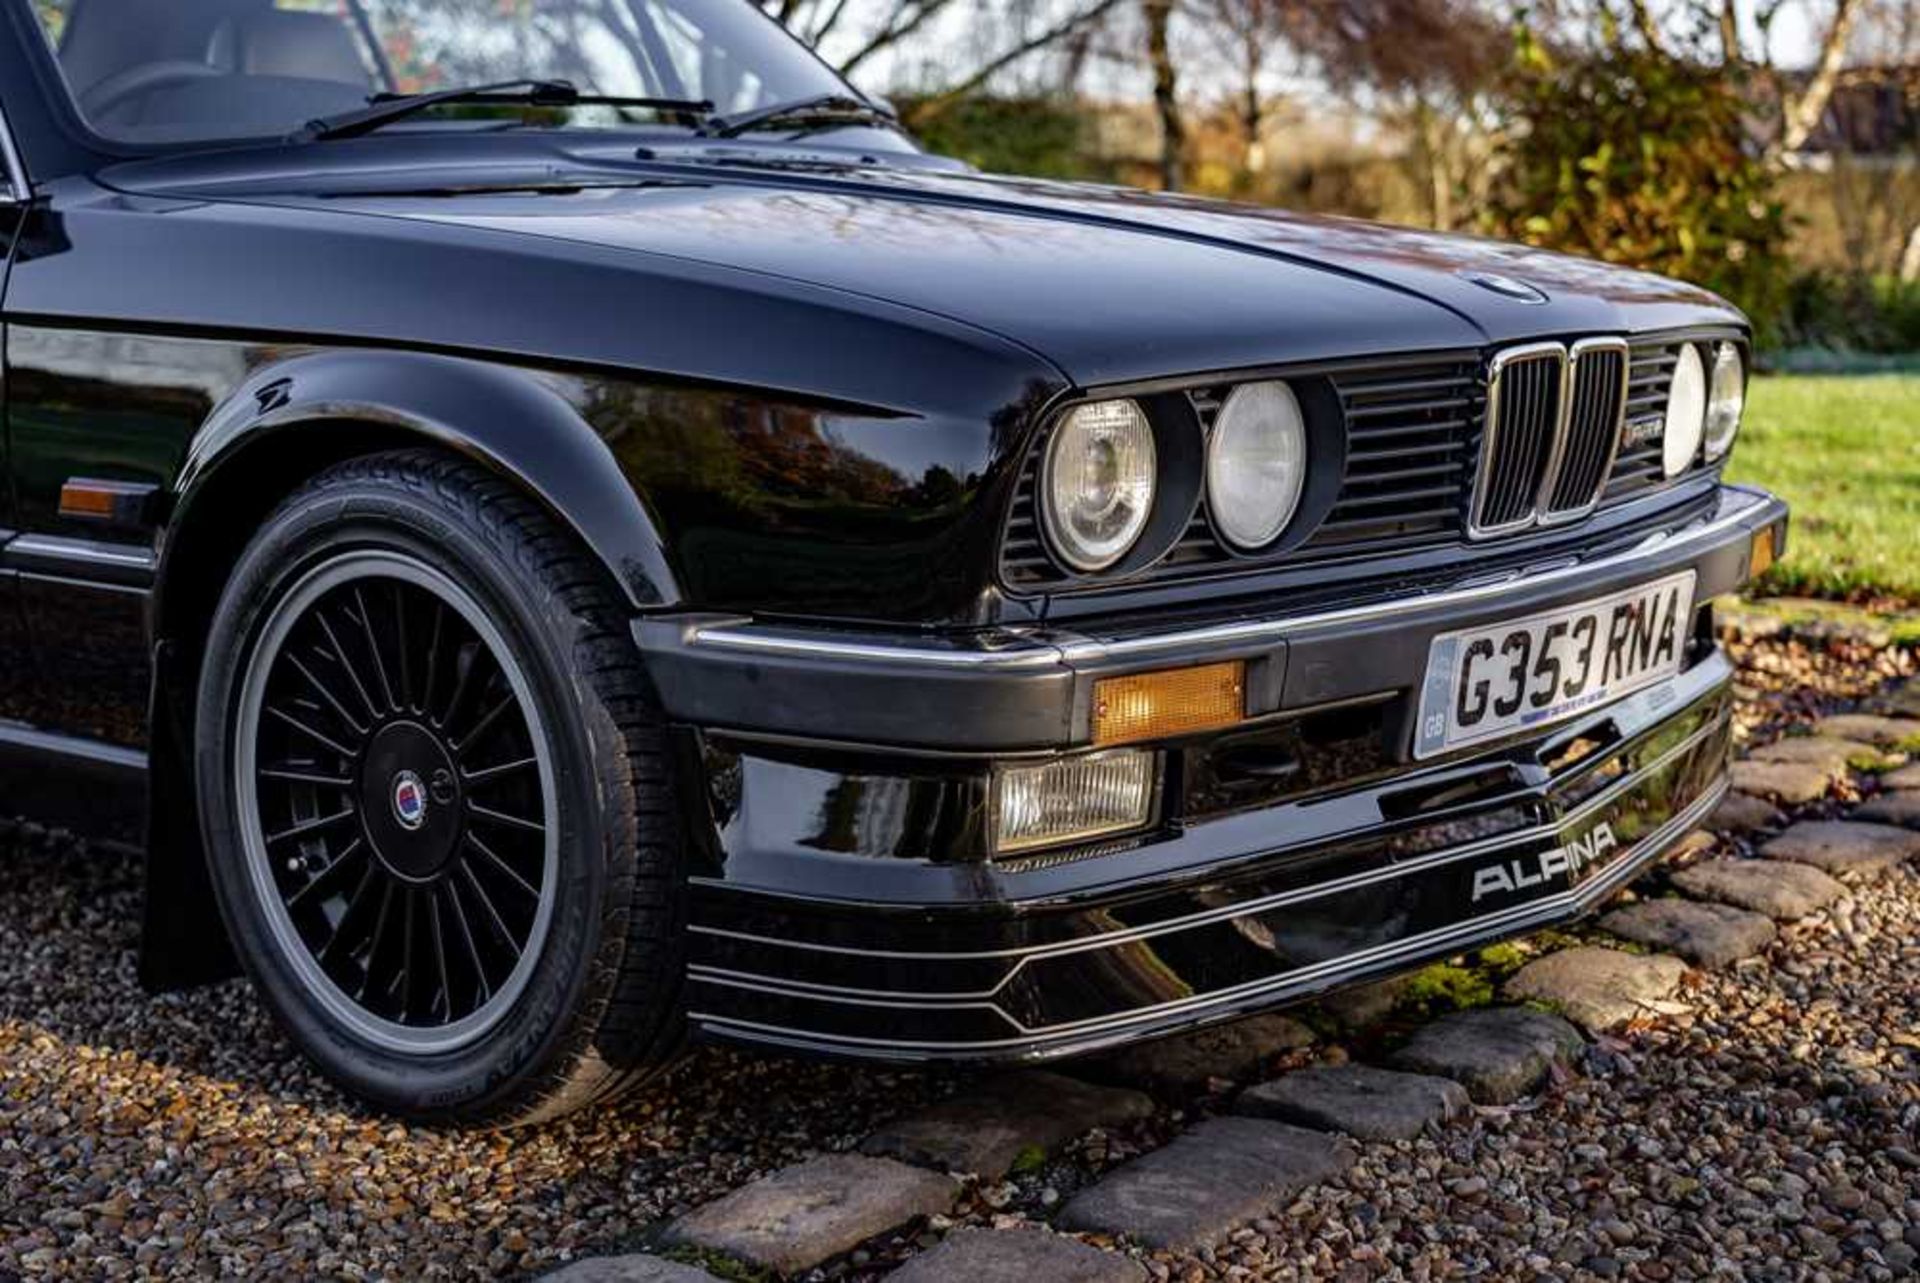 1989 BMW 320i Convertible Converted to Alpina 328i Specification - Image 16 of 51